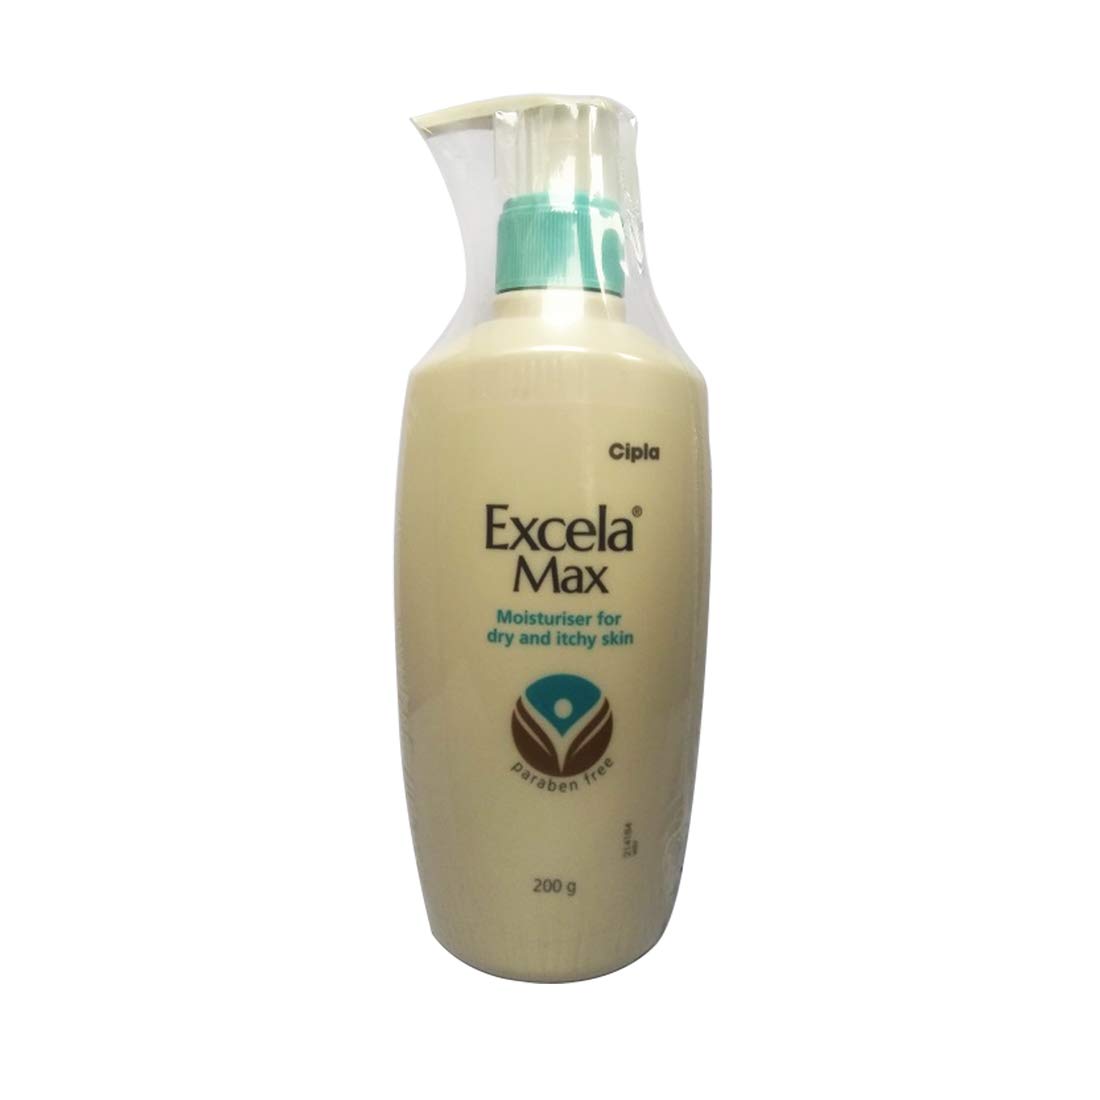 Excela Max Moisturiser for Dry and Itchy Skin